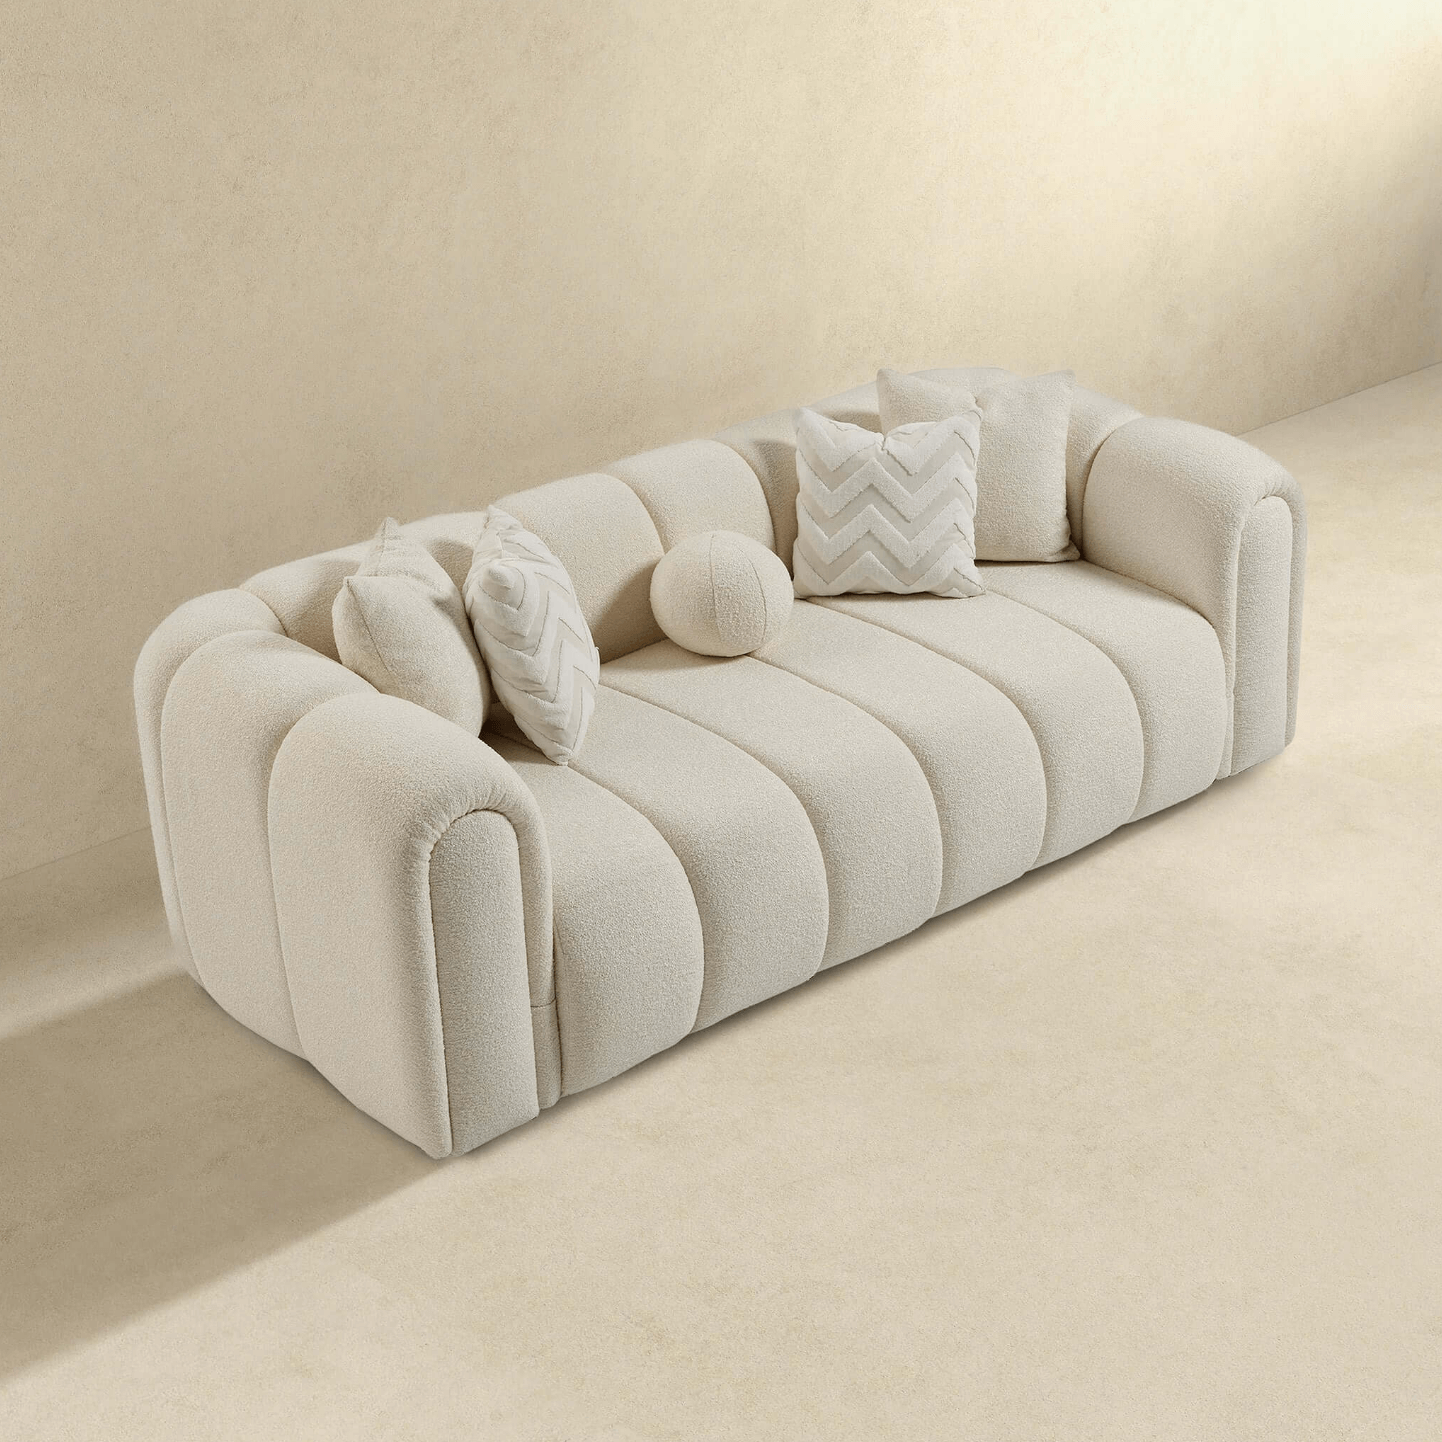 Beatrice Channel Tufted Boucle Sofa, Ivory 93" - Revel Sofa 